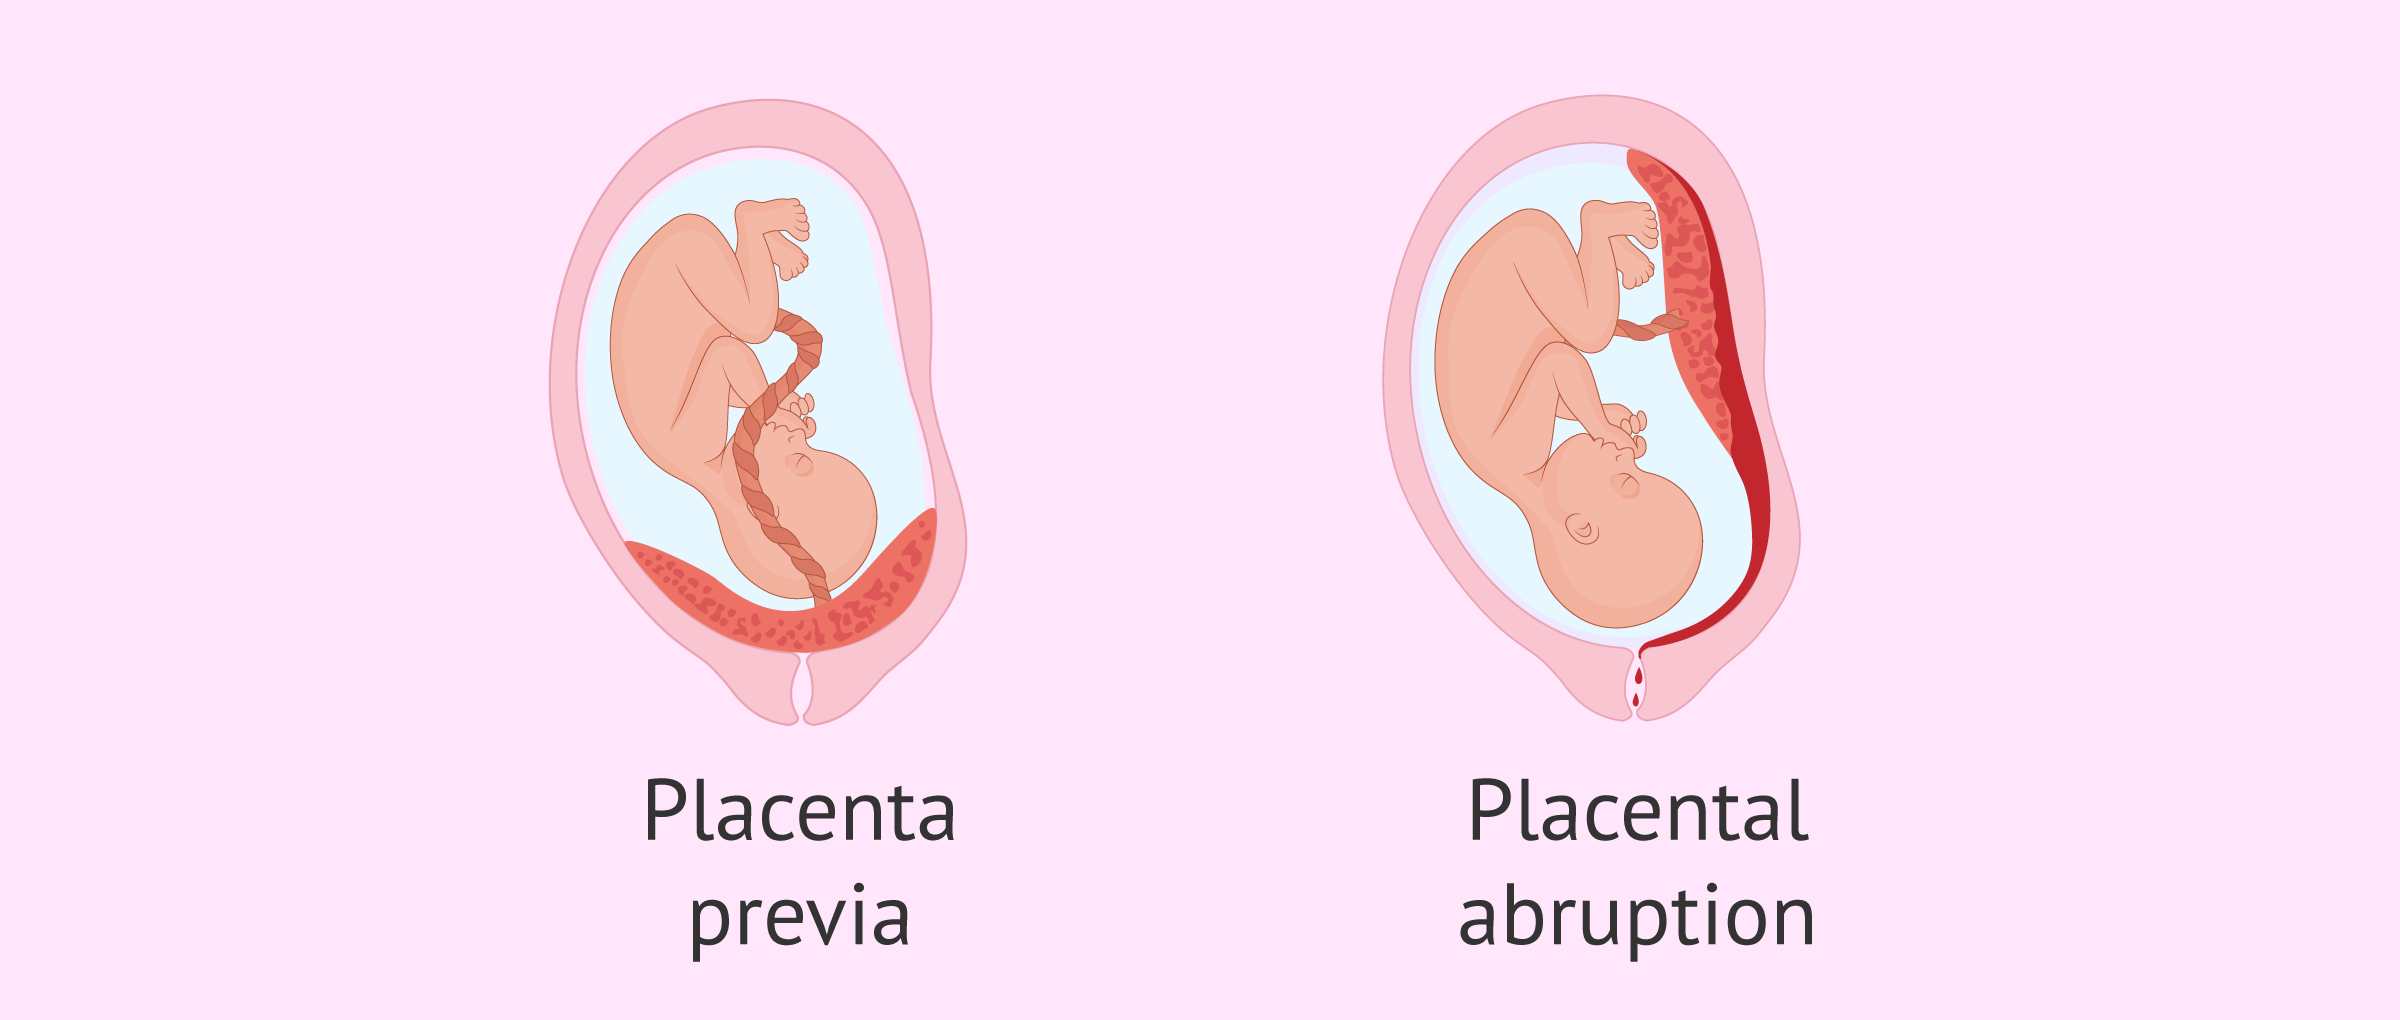 Complications in pregnancy due to problems in the placenta